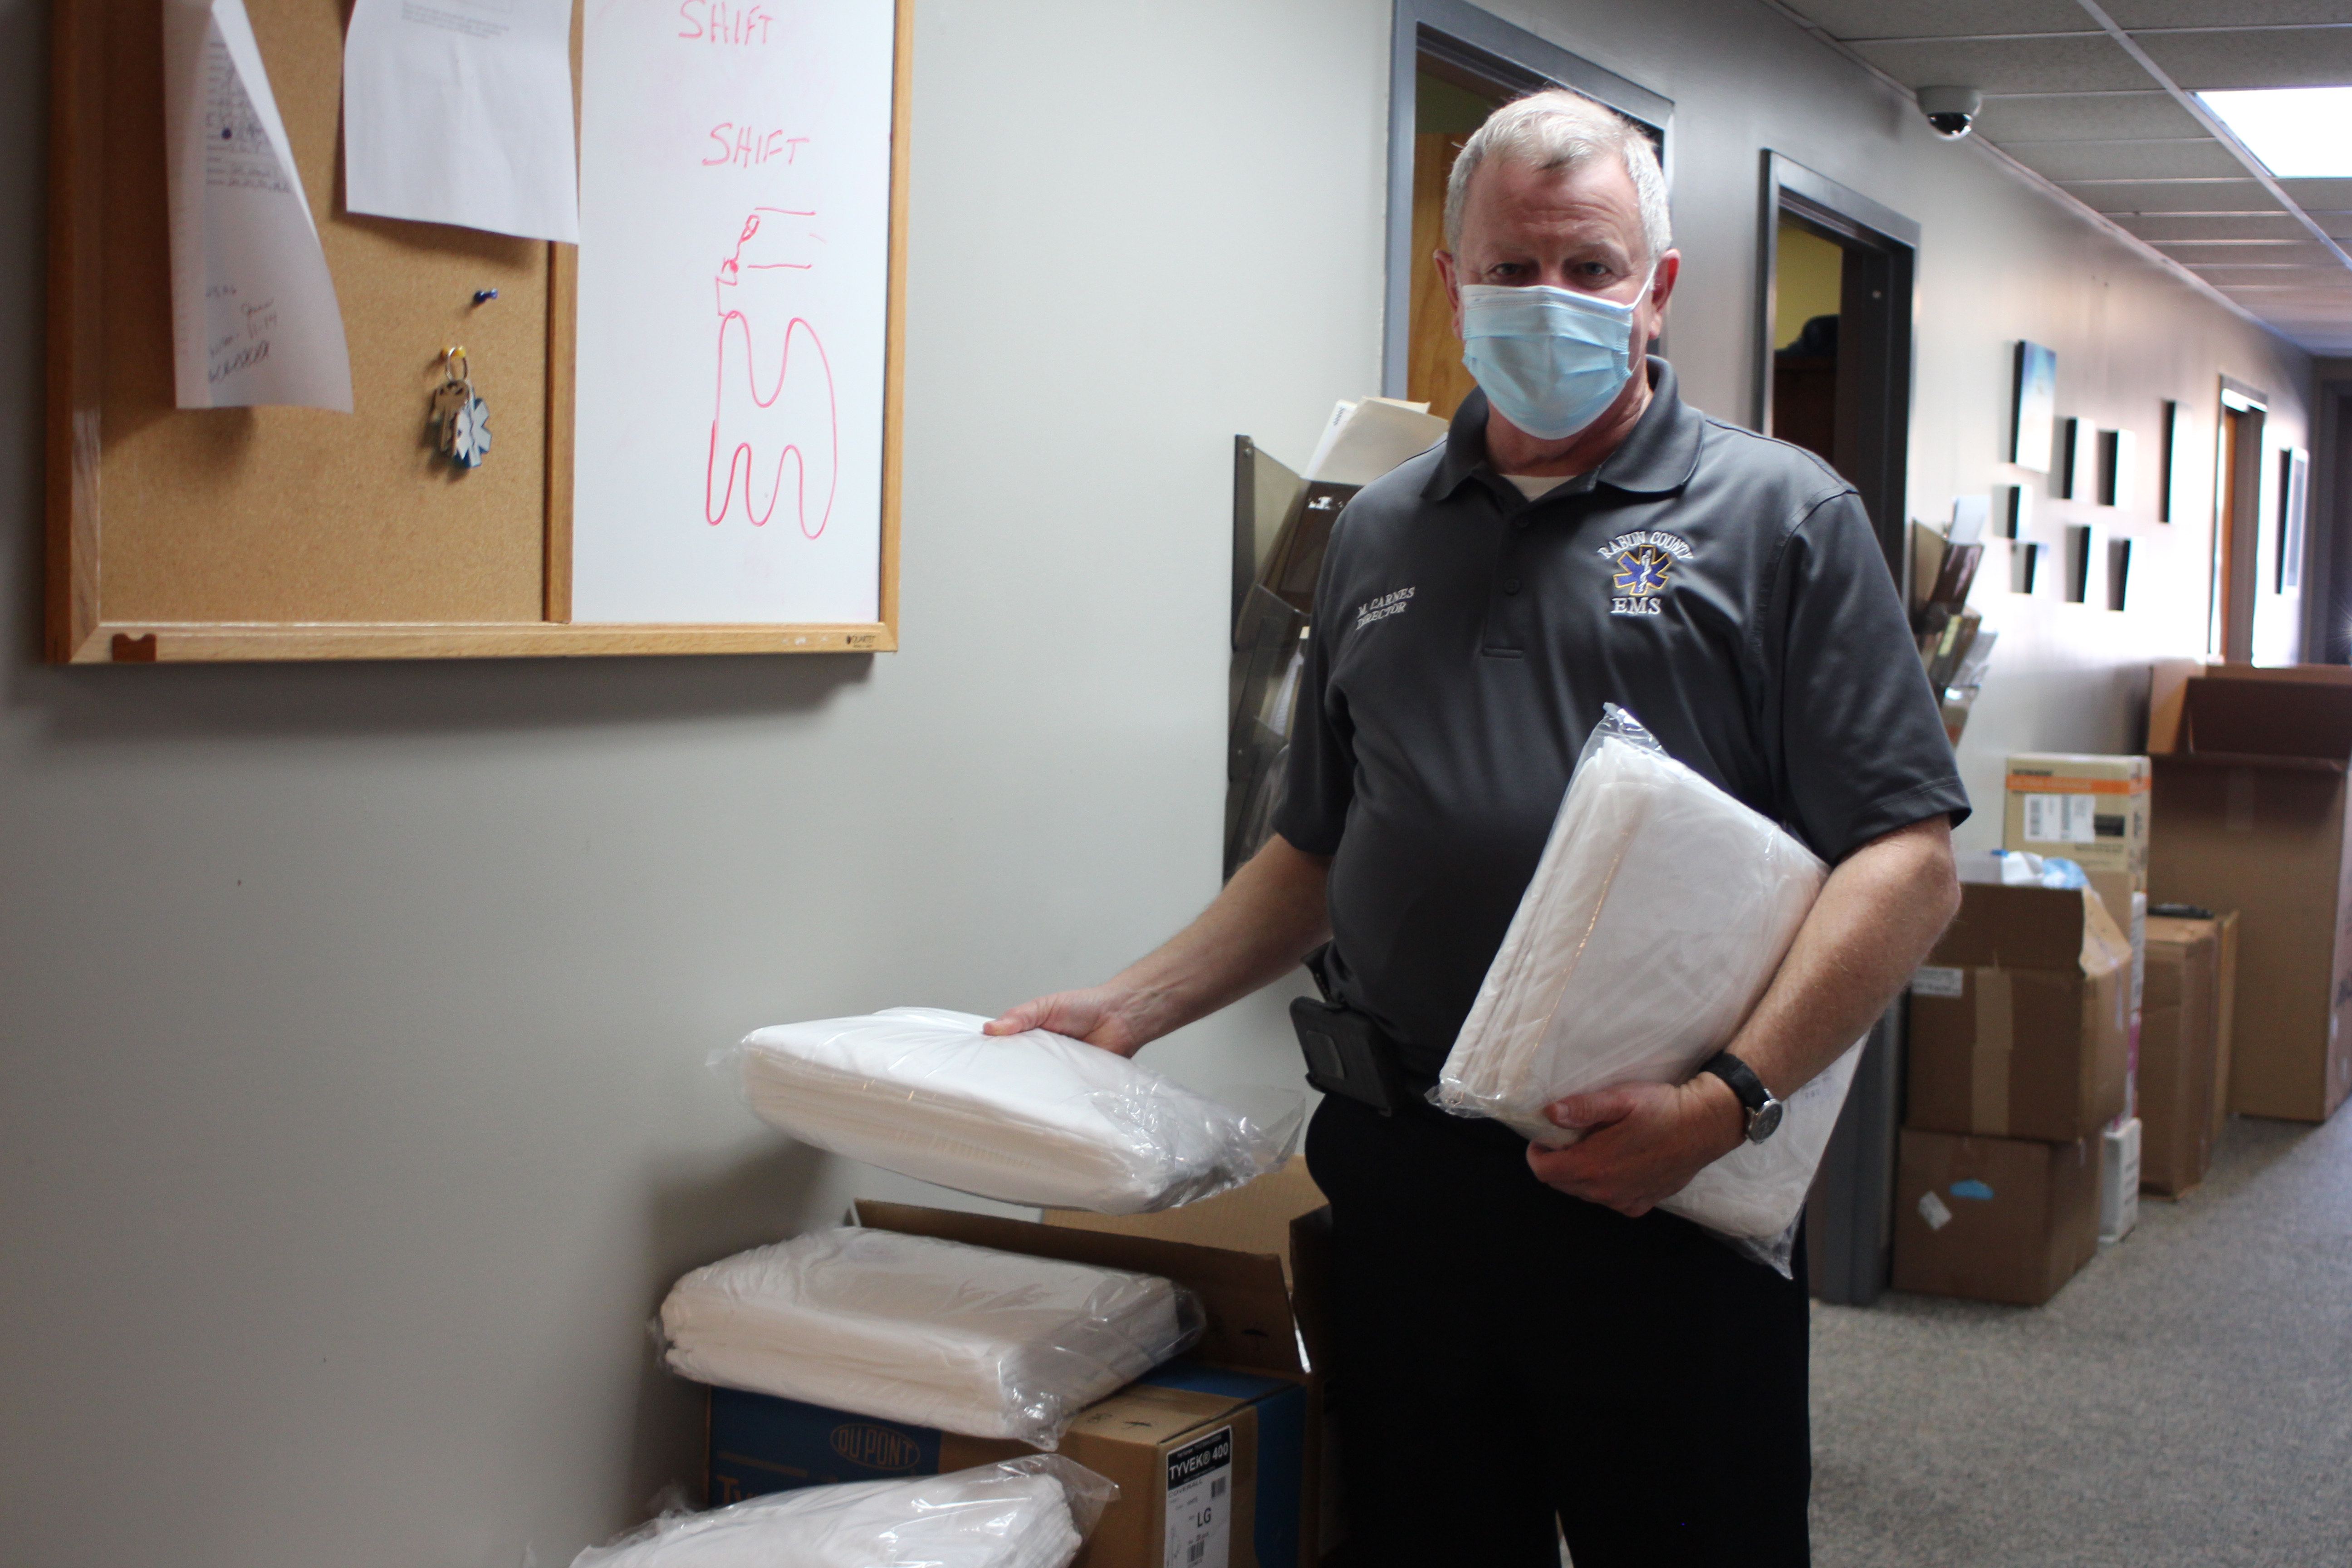 Megan Broome/The Clayton Tribune. Mike Carnes, director of Rabun County EMS and 911, sifts through boxes of supplies and Personal Protective Equipment (PPEs) that personnel use when responding to calls. Supplies were ordered in bulk and Captain Trampes Stancil said that he feels the department is well prepared with PPEs to protect personnel and treat patients during the pandemic. 